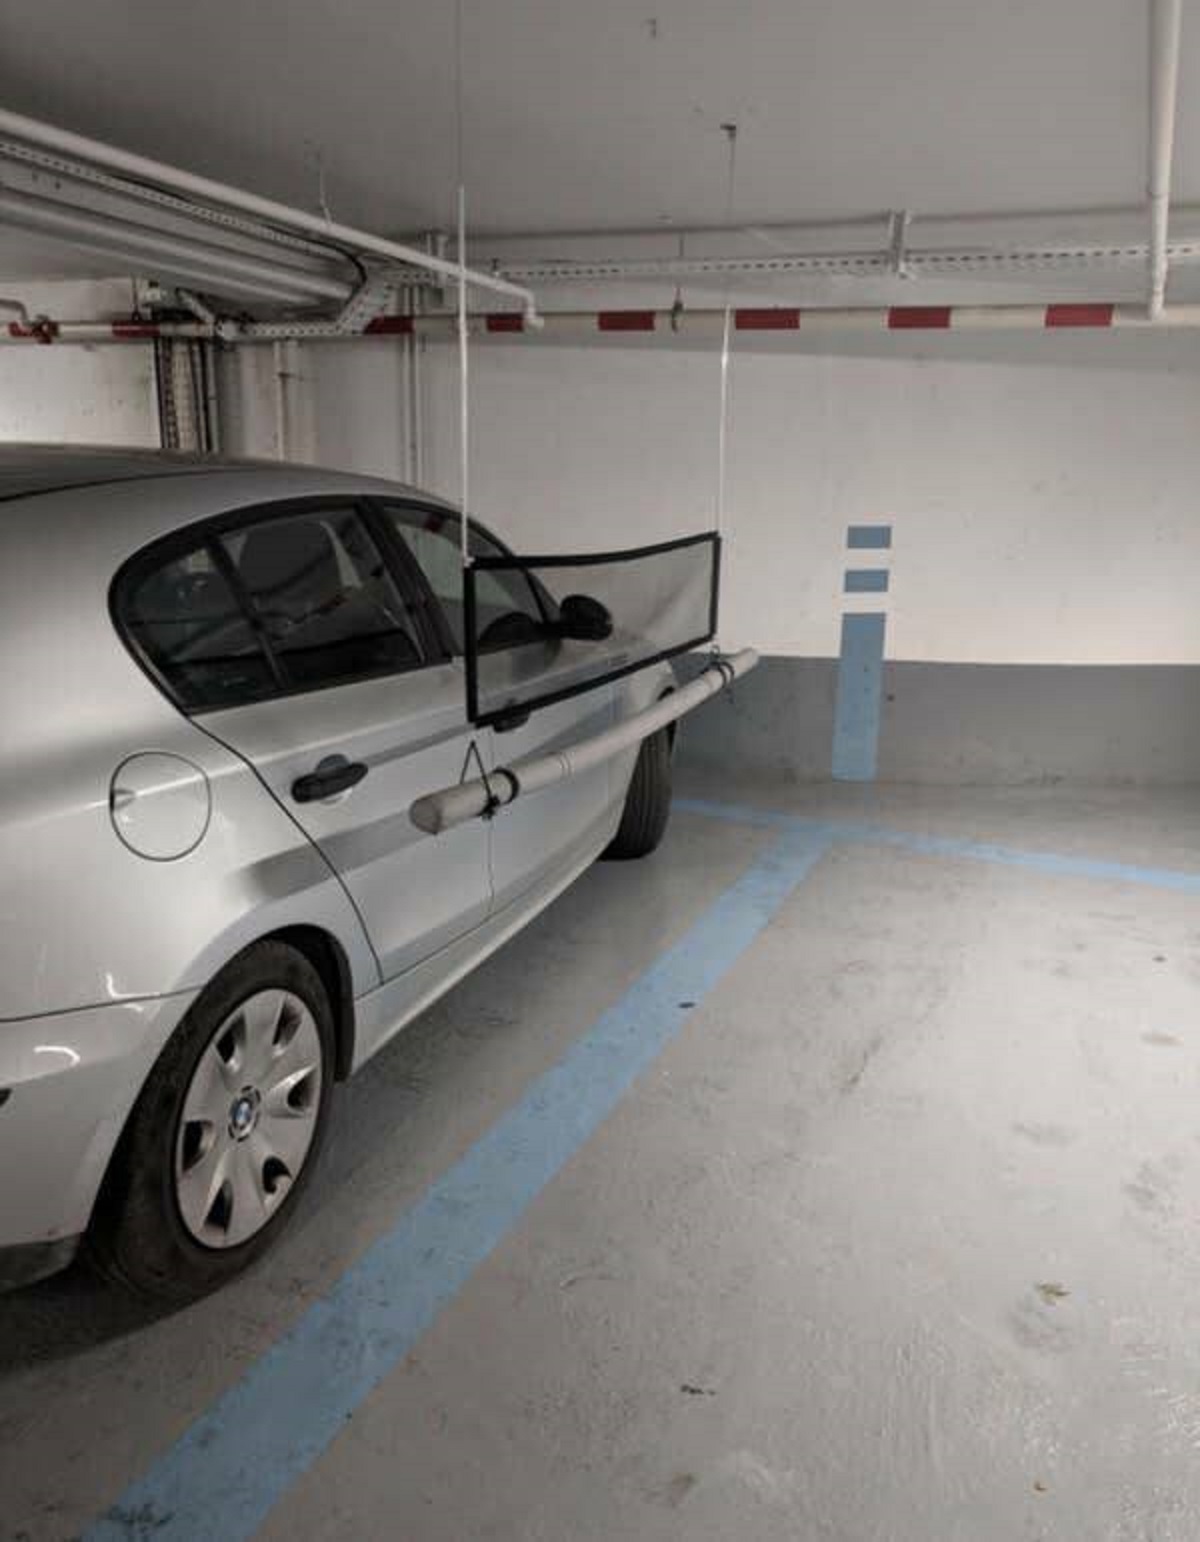 In France, there are parking garages with these neat little dividers to stop people from accidentally denting or scratching the car next to them when they get out.